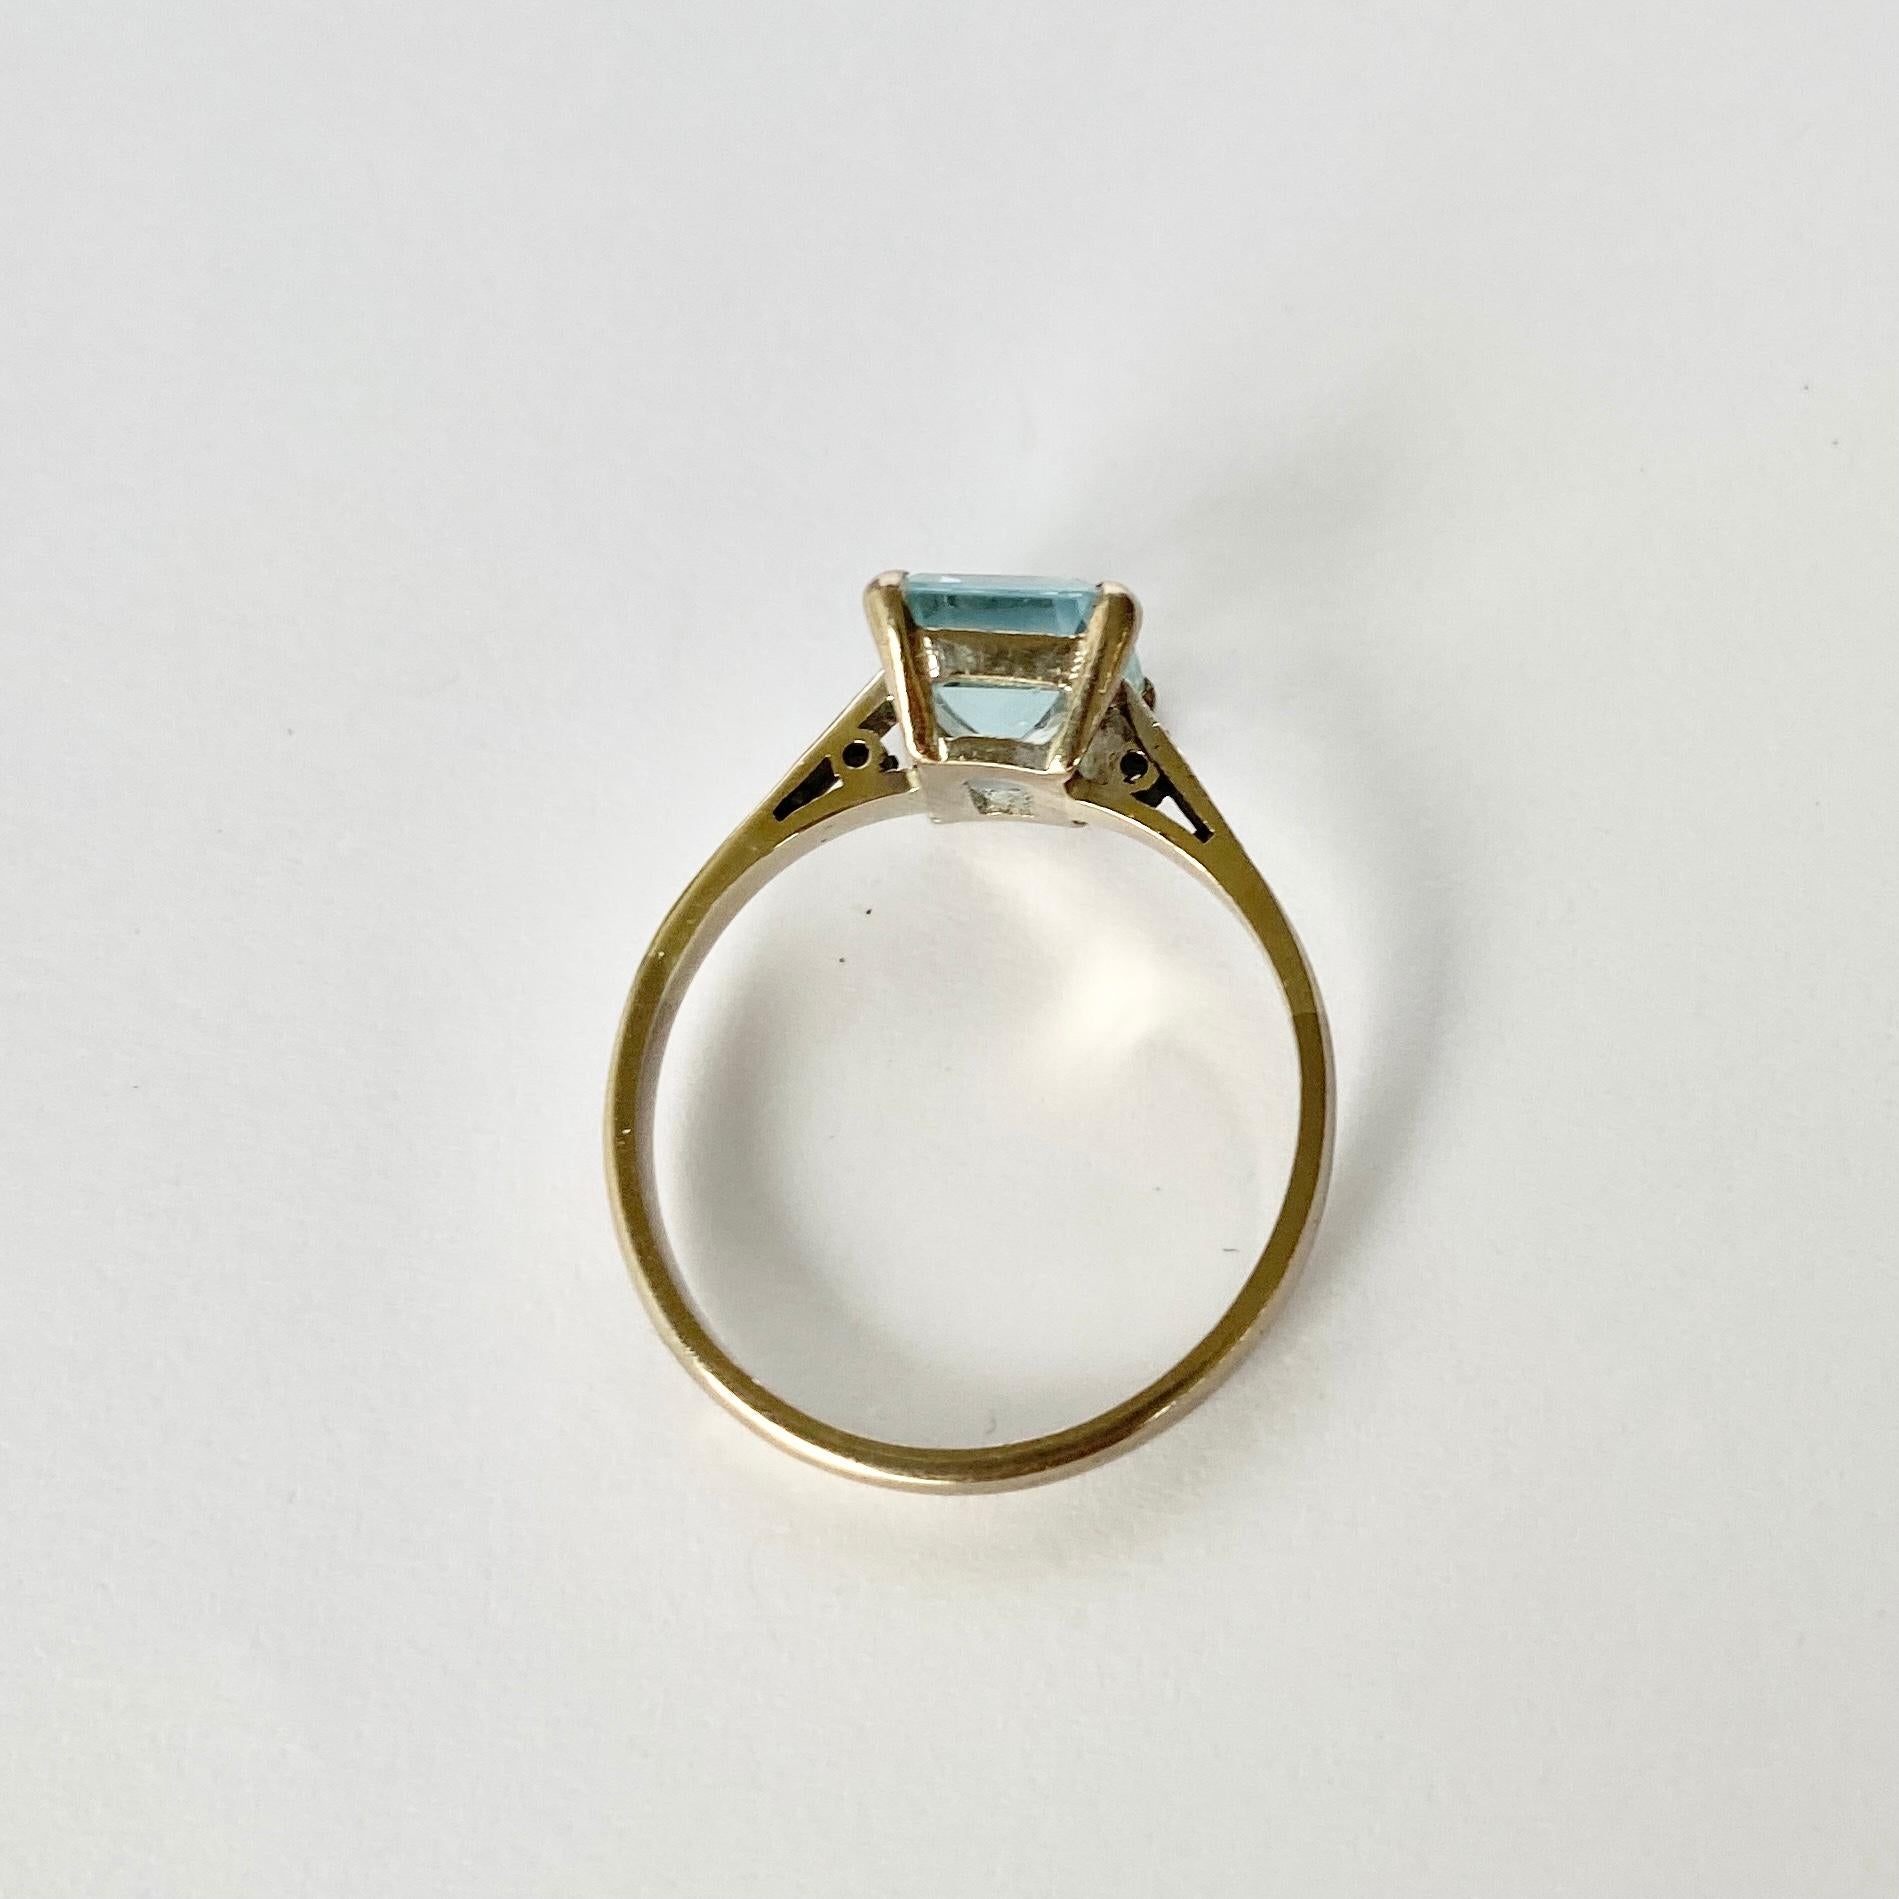 Set high in simple claws and gallery modelled in 18ct white gold is the most stunning aqua stone. The aqua is a pale blue and is emerald cut which reflects the light beautifully. Either side of this stone sits a pair of diamond points. 

Ring Size: